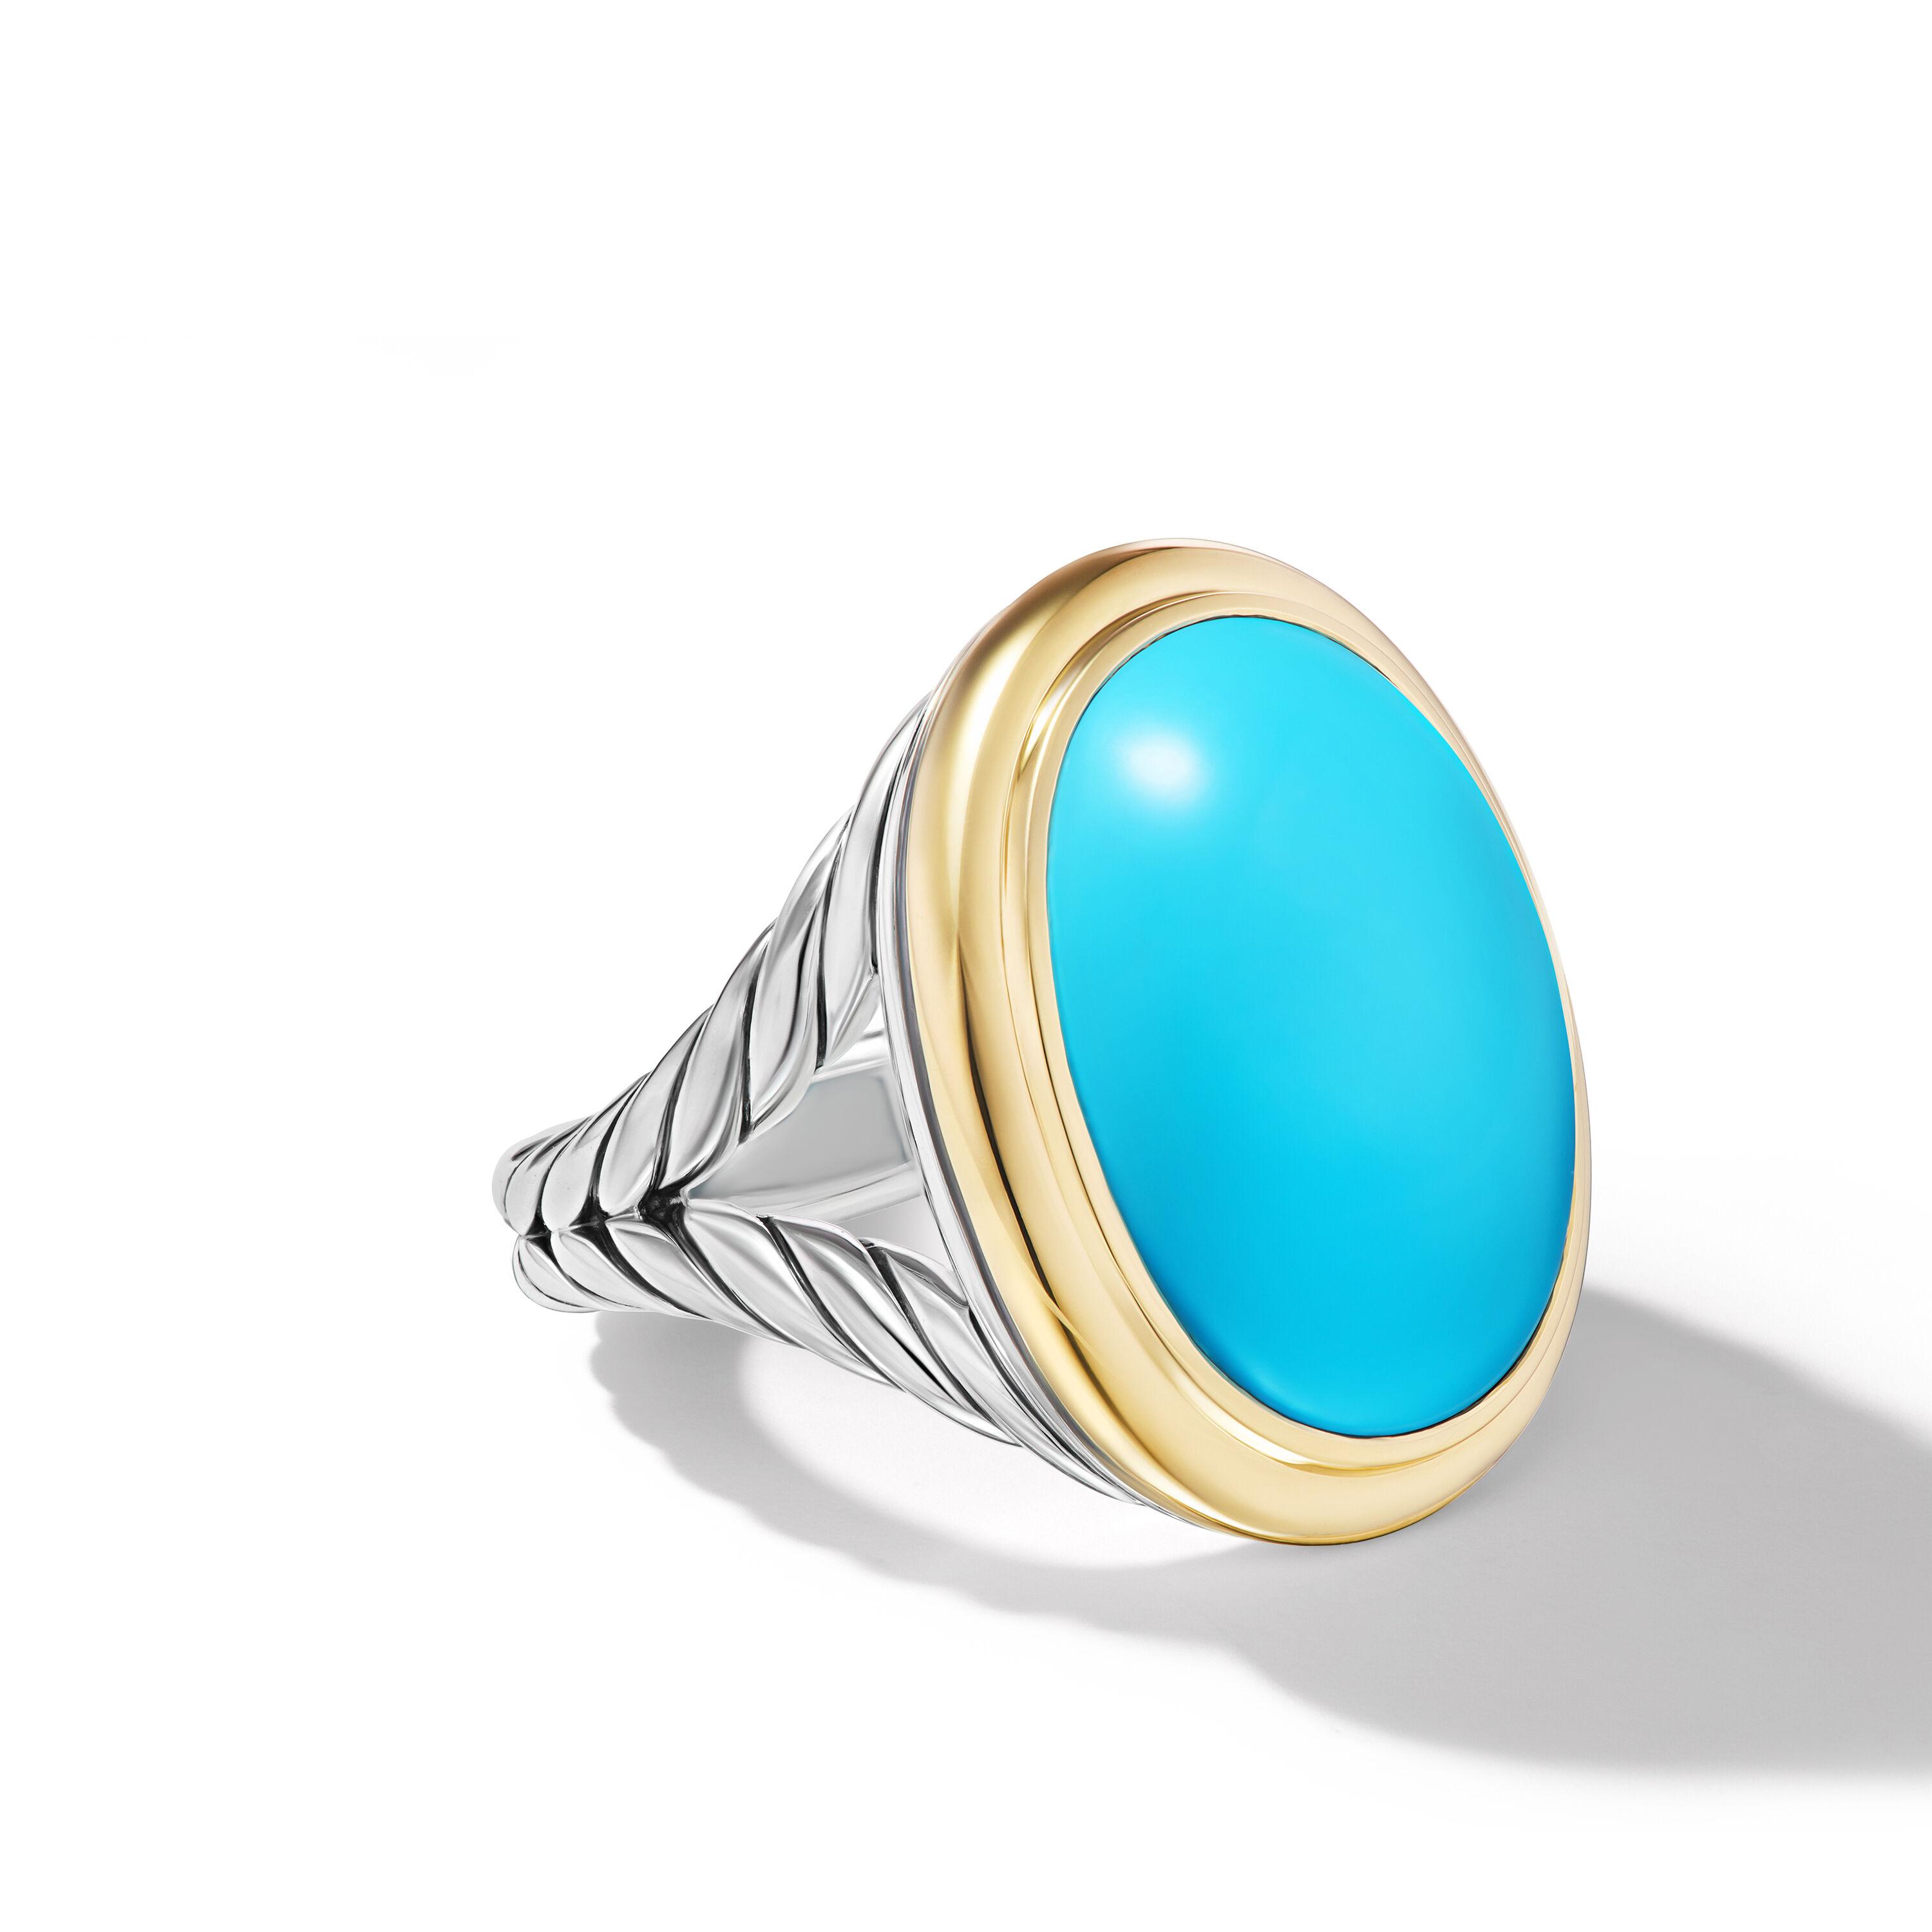 David Yurman Albion Oval Ring in Sterling Silver with 18K Yellow Gold and Turquoise